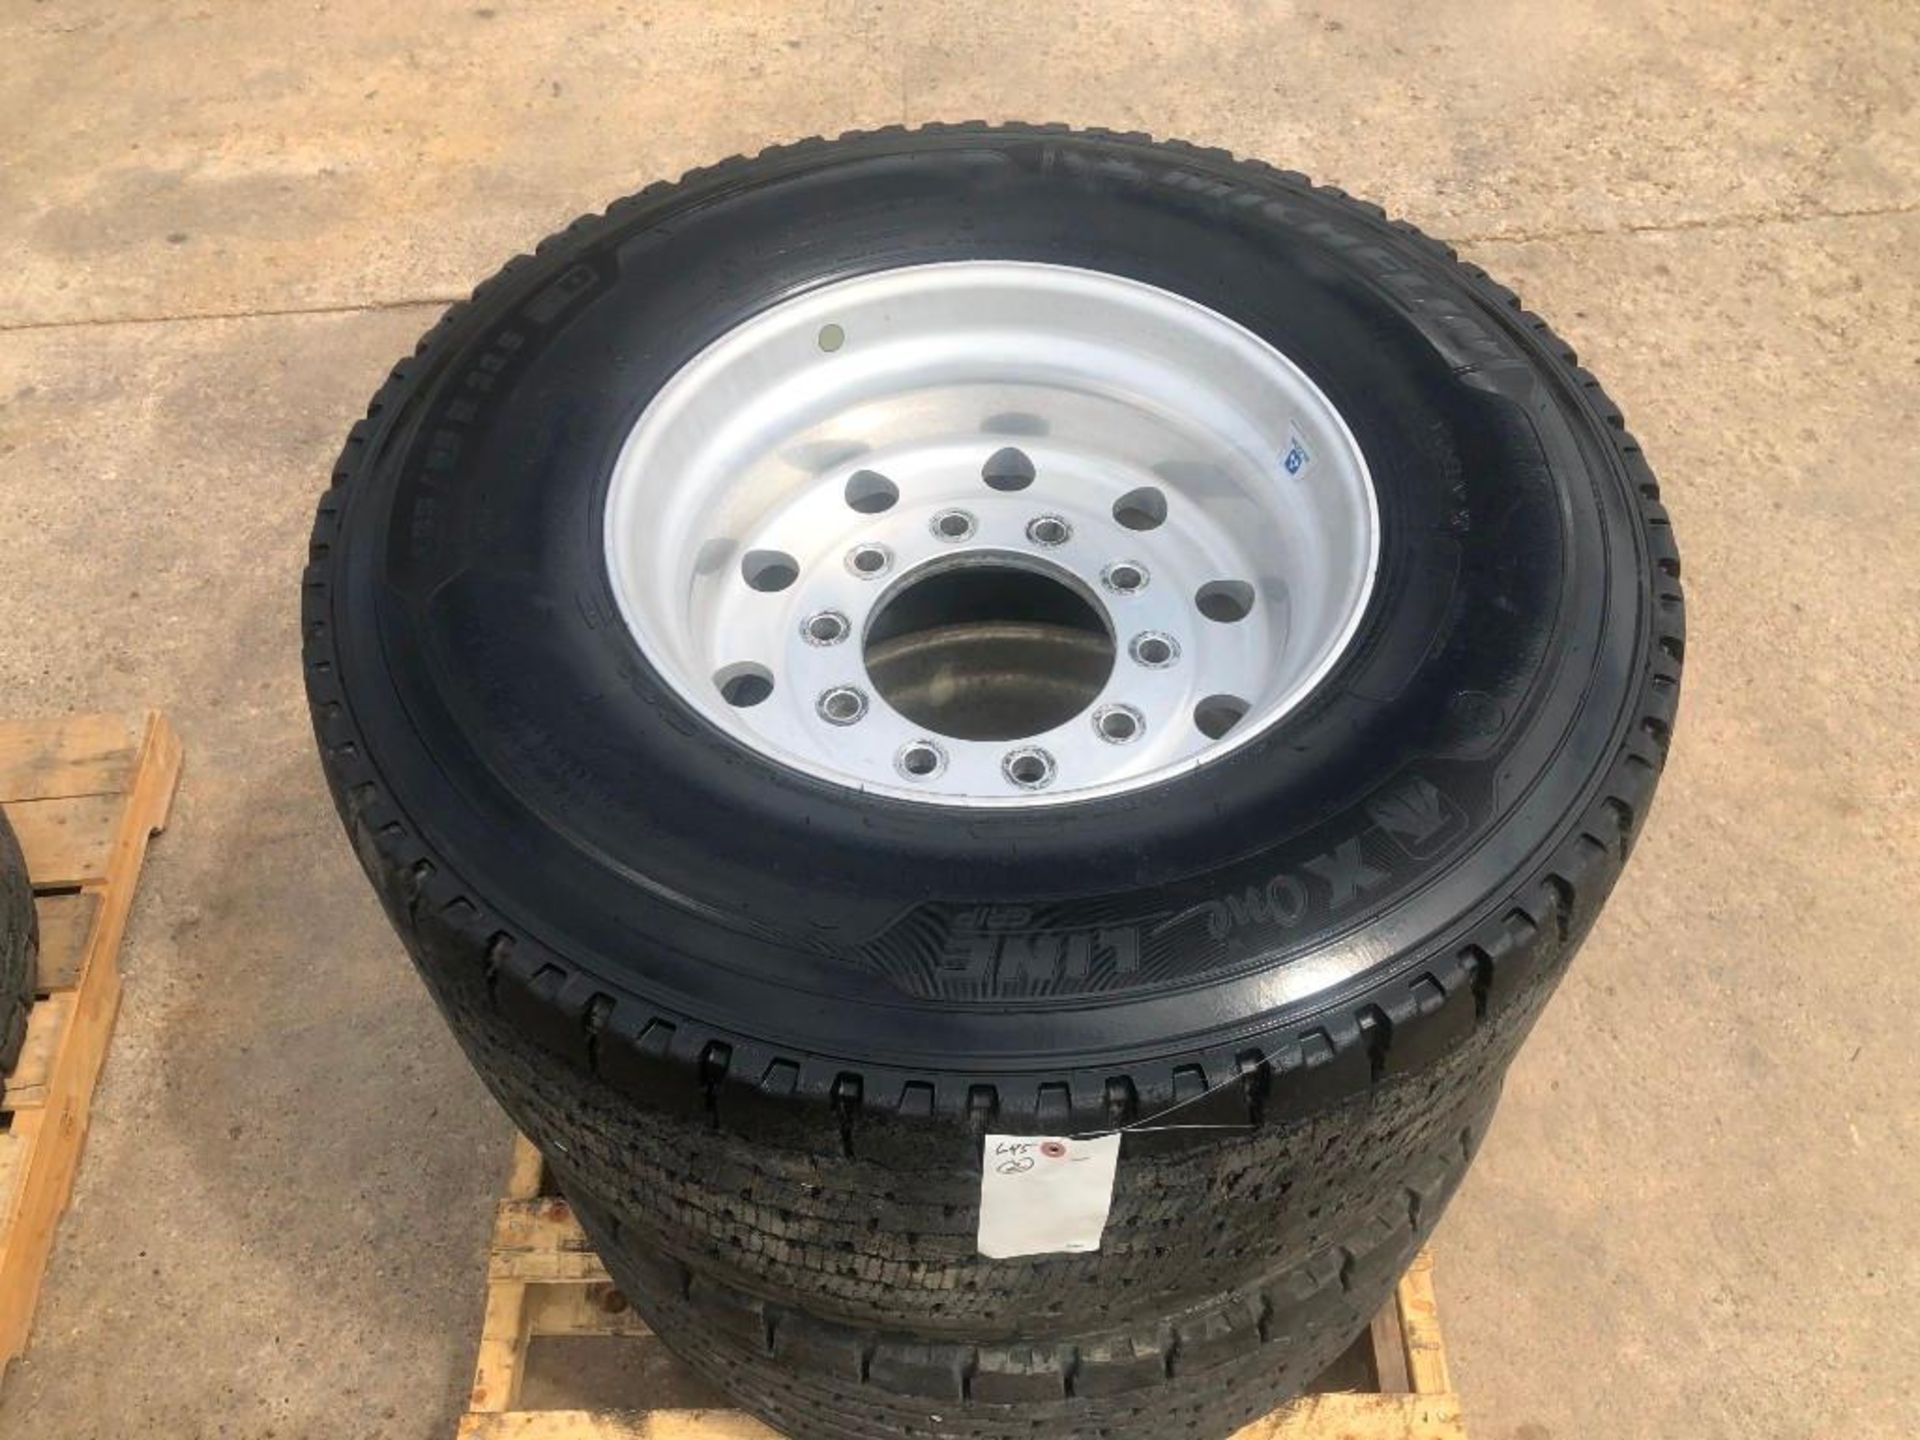 (2) Michelin 445/ 50R 22.5 Drive Tires with Rims. Located at 301 E Henry Street, Mt. Pleasant, IA - Image 3 of 3